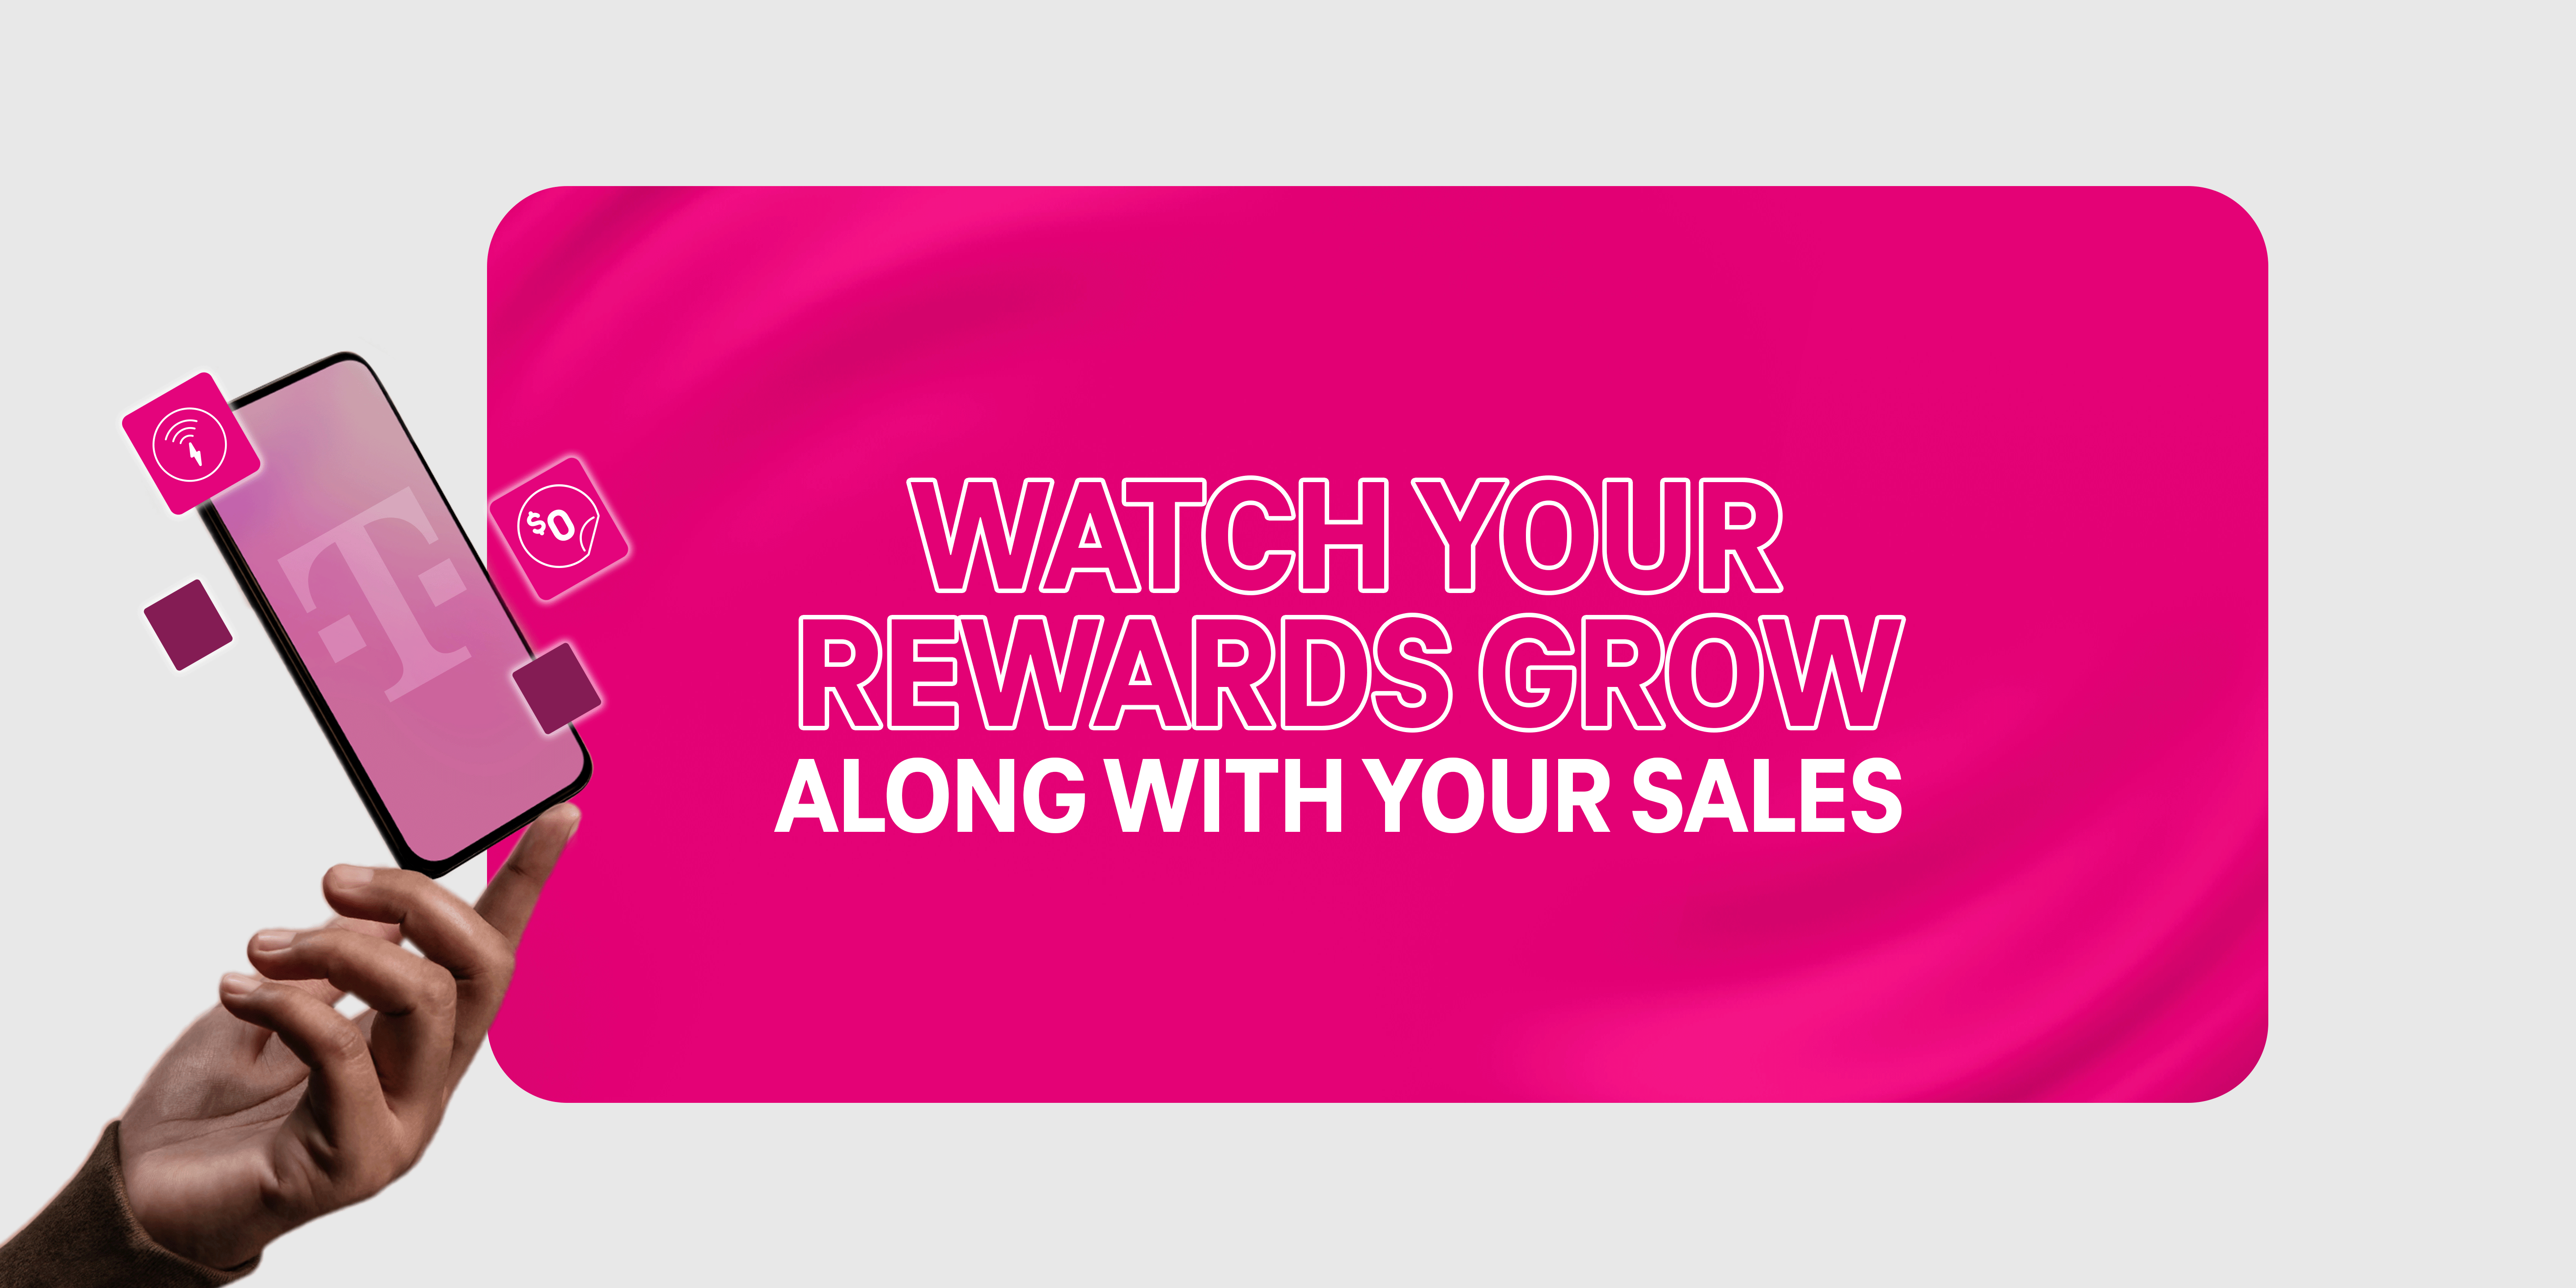 Watch your rewards grow along with your sales